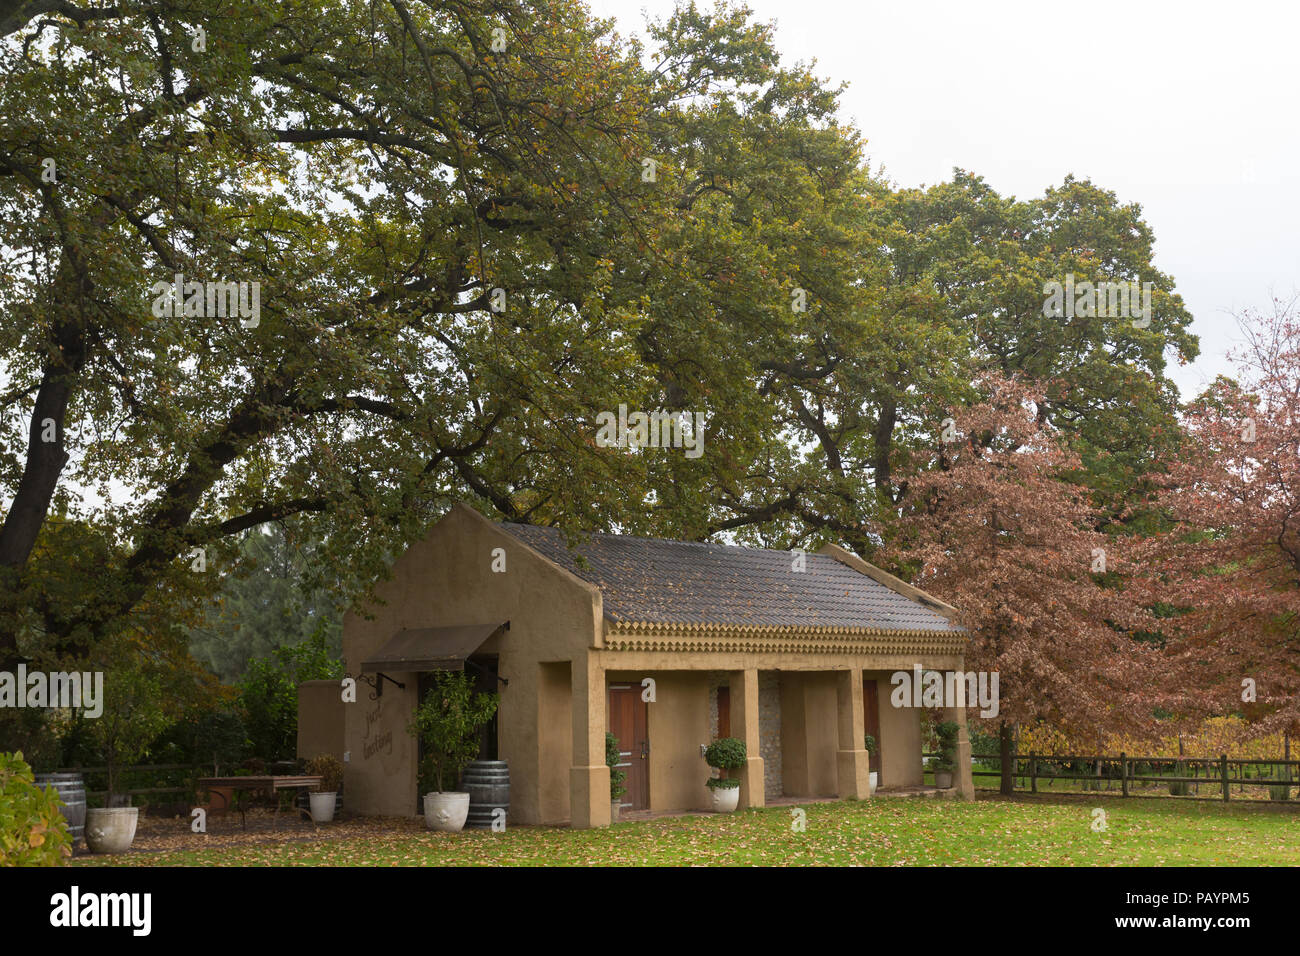 Autumn or Fall landscape scene of small cottage or building used as wine tasting centre set in large garden with trees as background and decor items Stock Photo